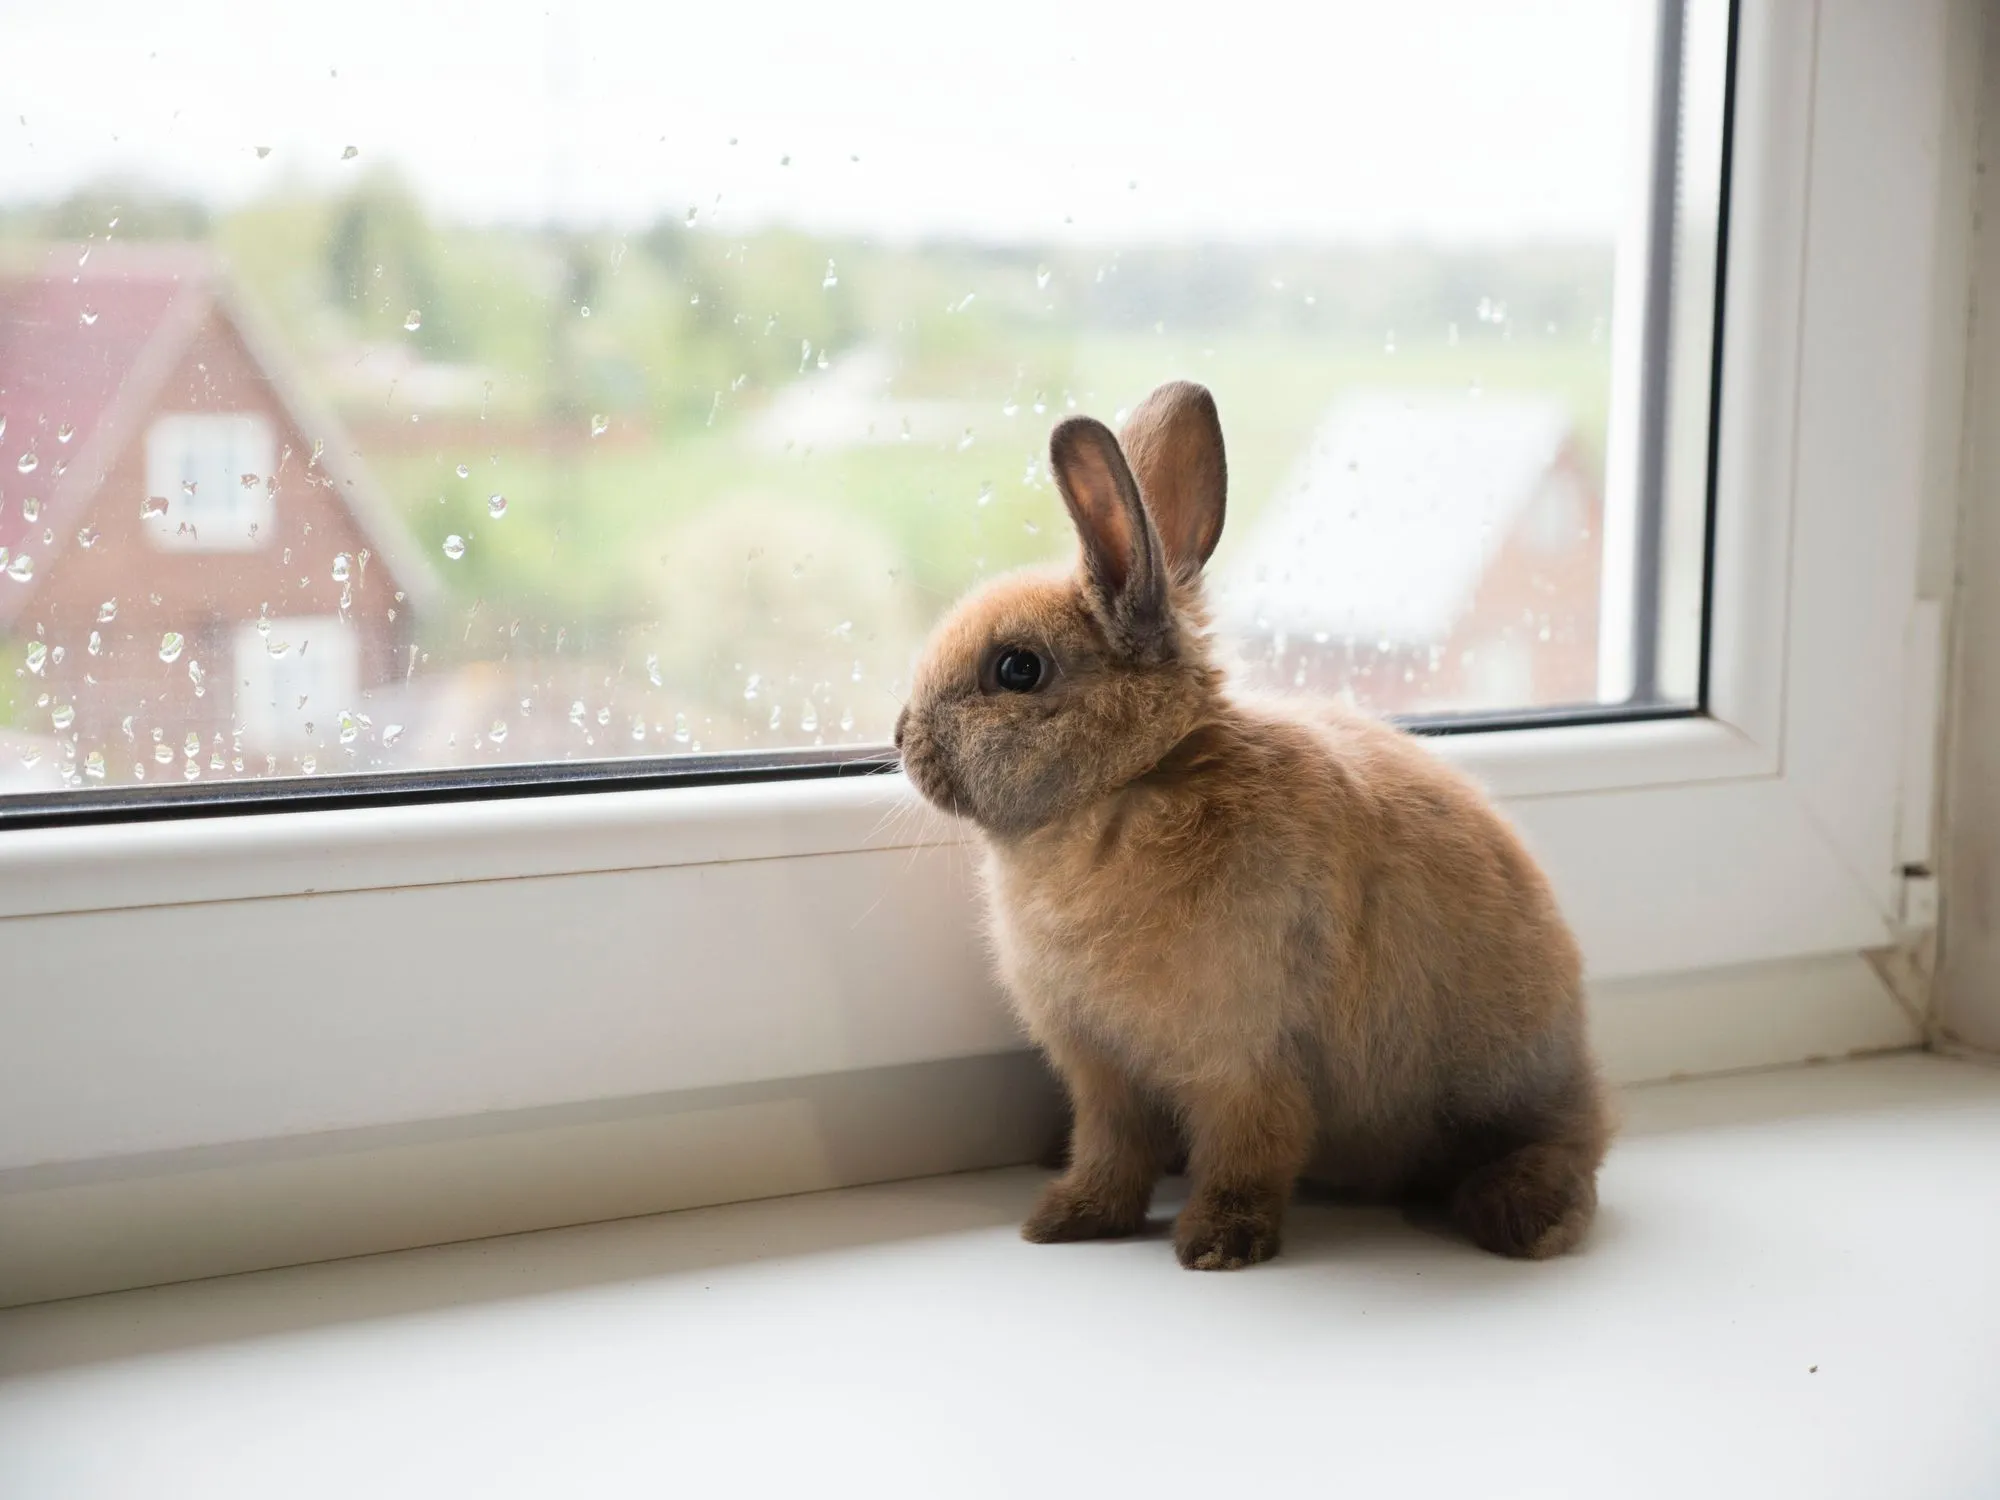 How Long Are Rabbits Pregnant For? Hop Over To Our Bunny Broadcast | Kidadl